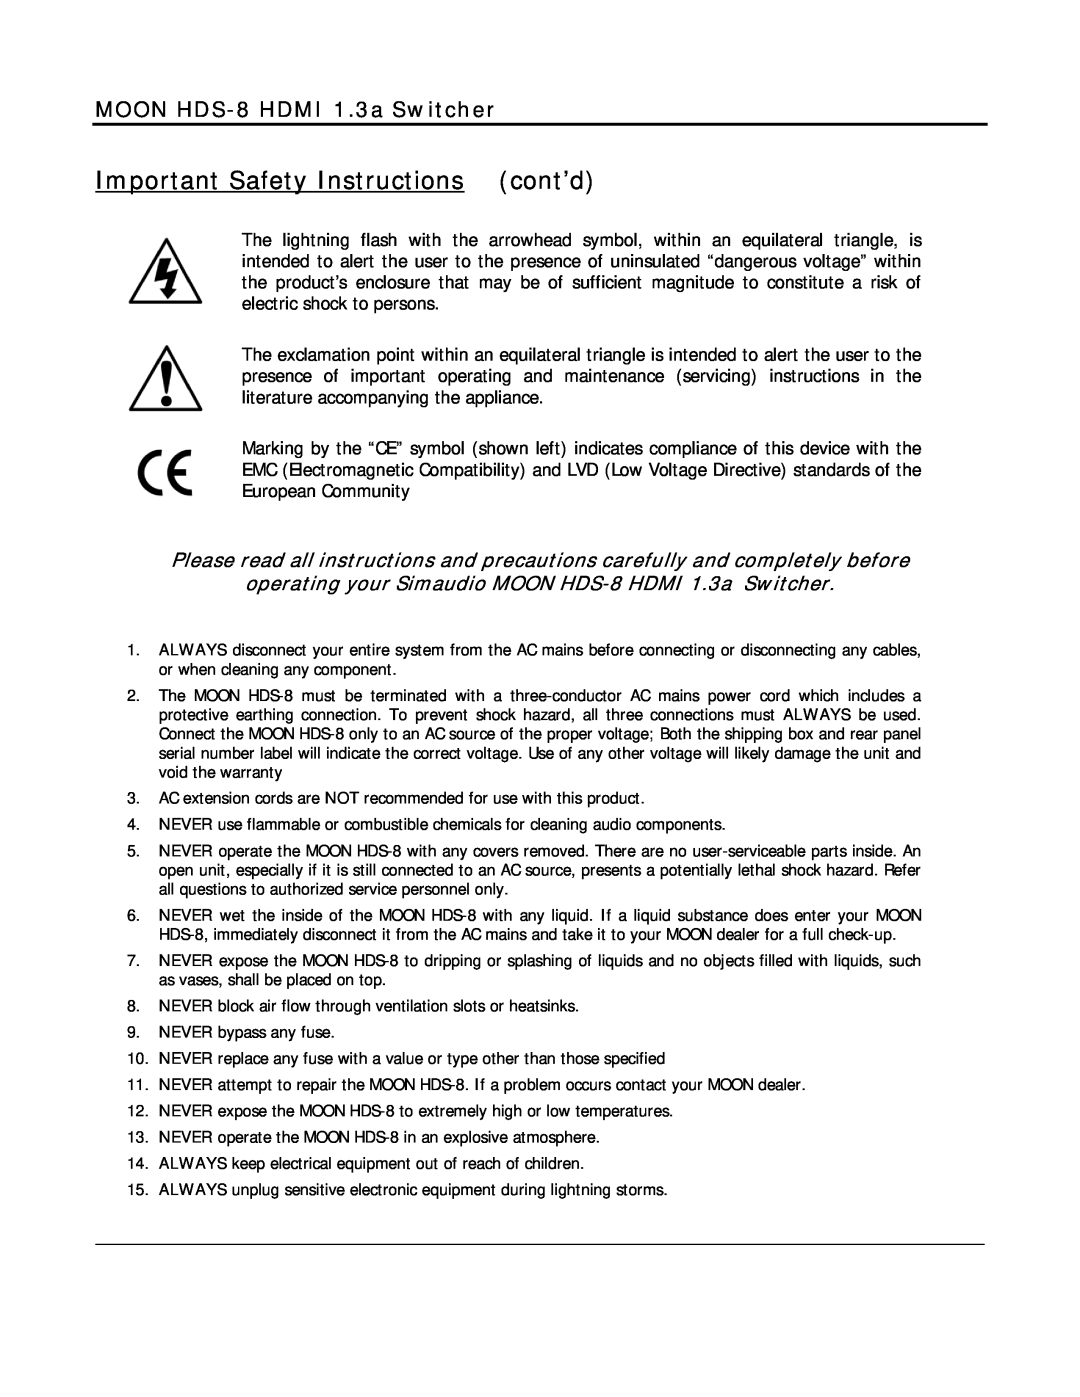 Simaudio owner manual Important Safety Instructions cont’d, MOON HDS-8 HDMI 1.3a Switcher 